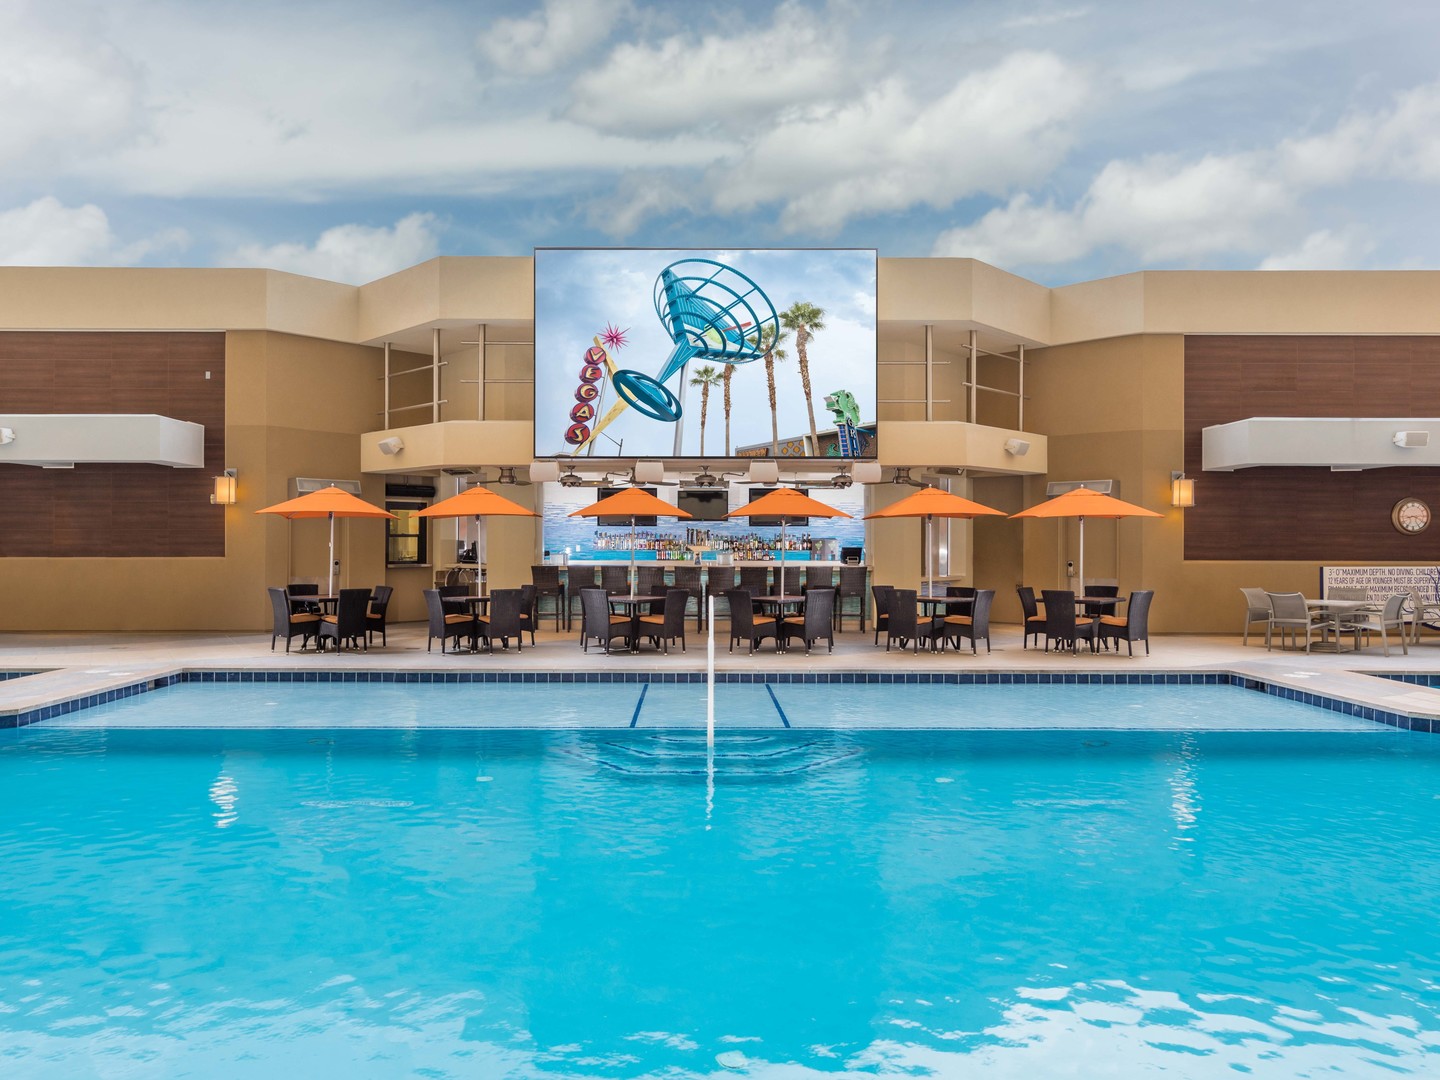 Marriott's Grand Chateau<span class='trademark'>®</span> 5th Floor Pool. Marriott's Grand Chateau<span class='trademark'>®</span> is located in Las Vegas, Nevada United States.